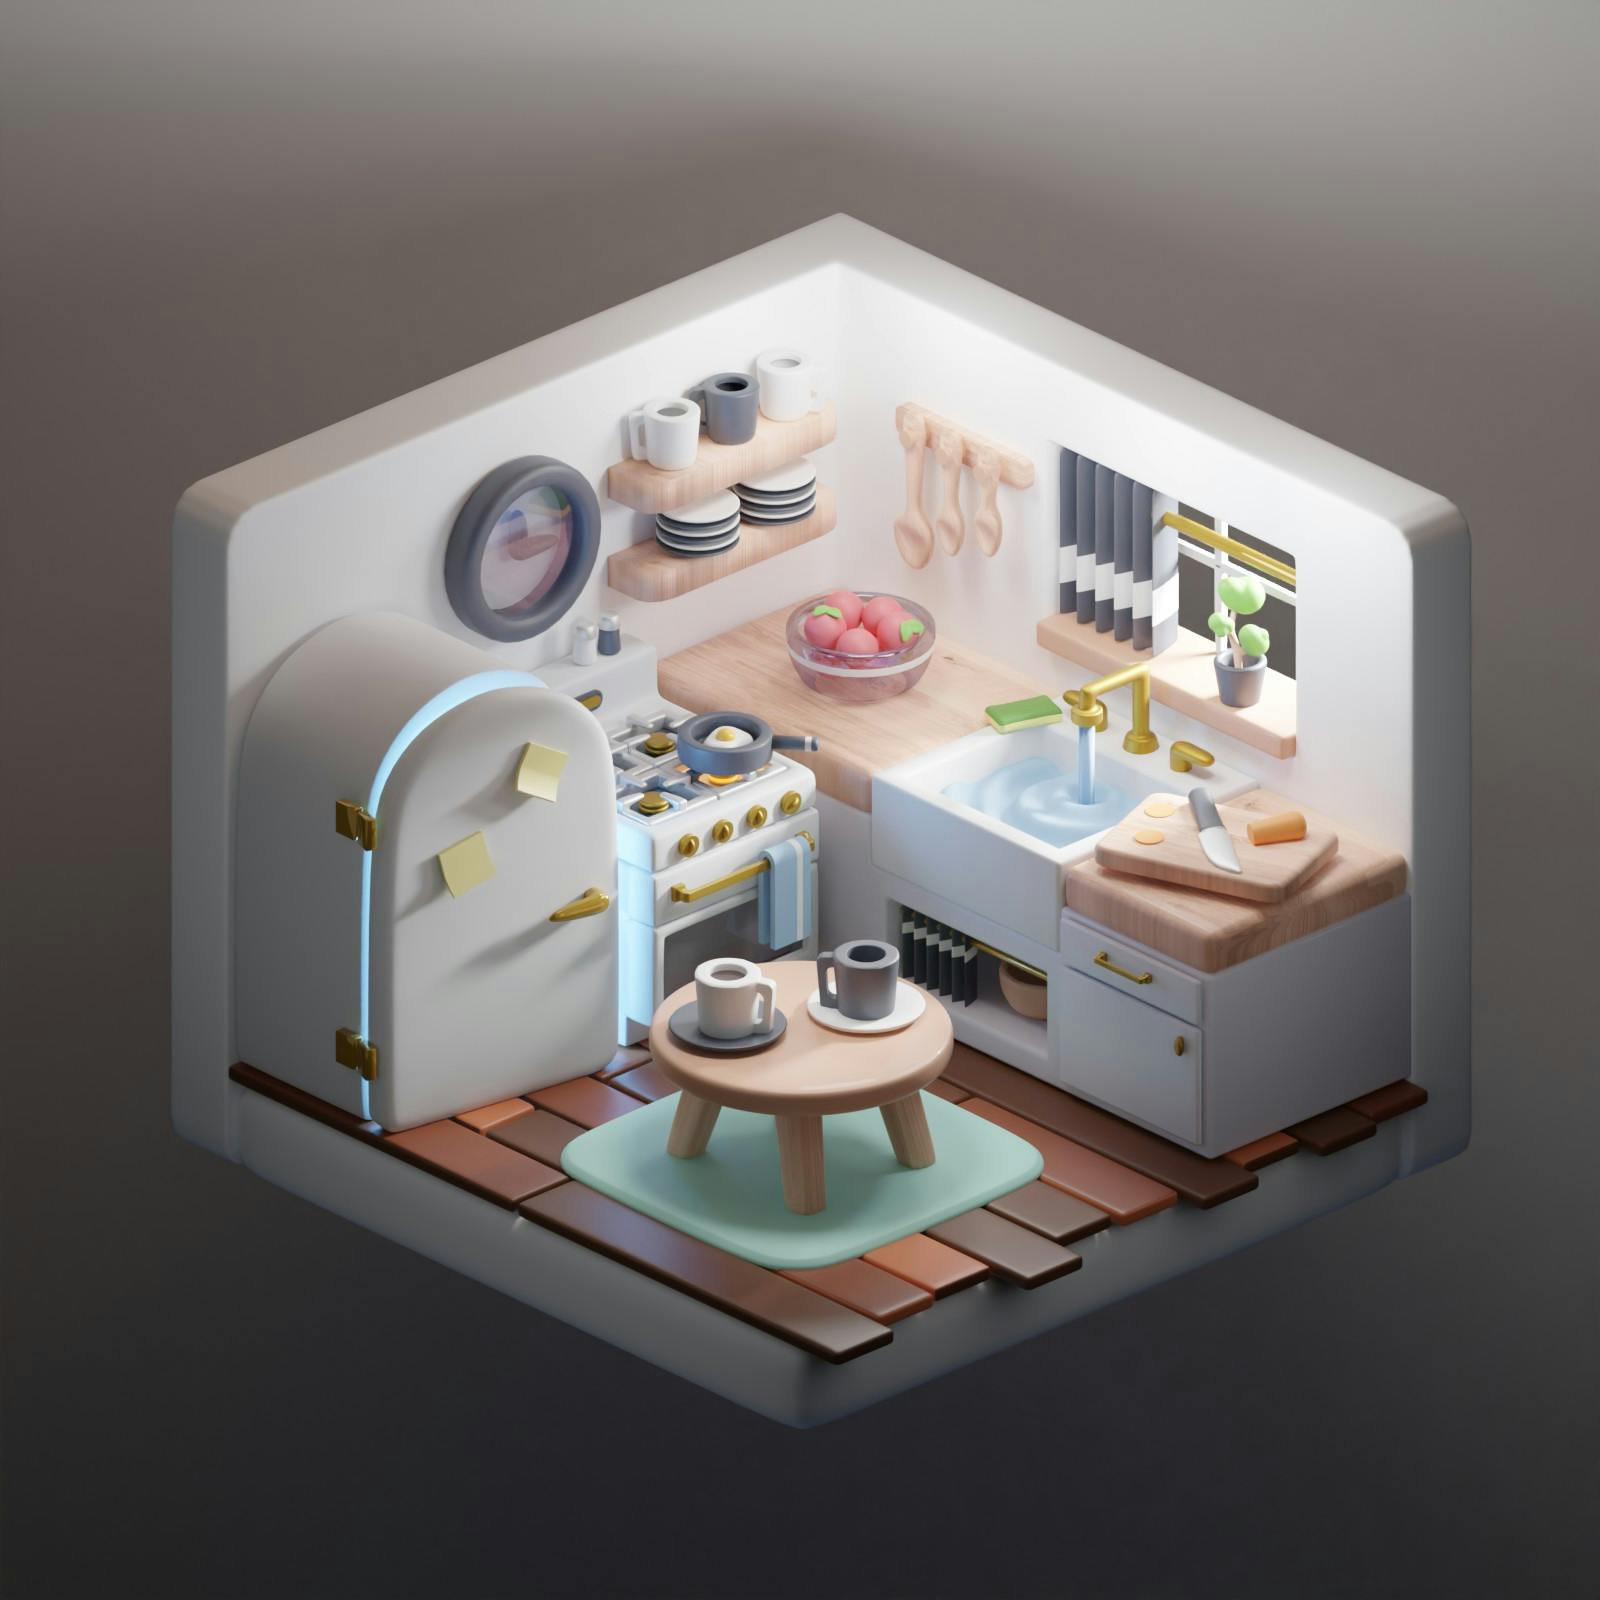 A 3D rendering of an isometric kitchen scene